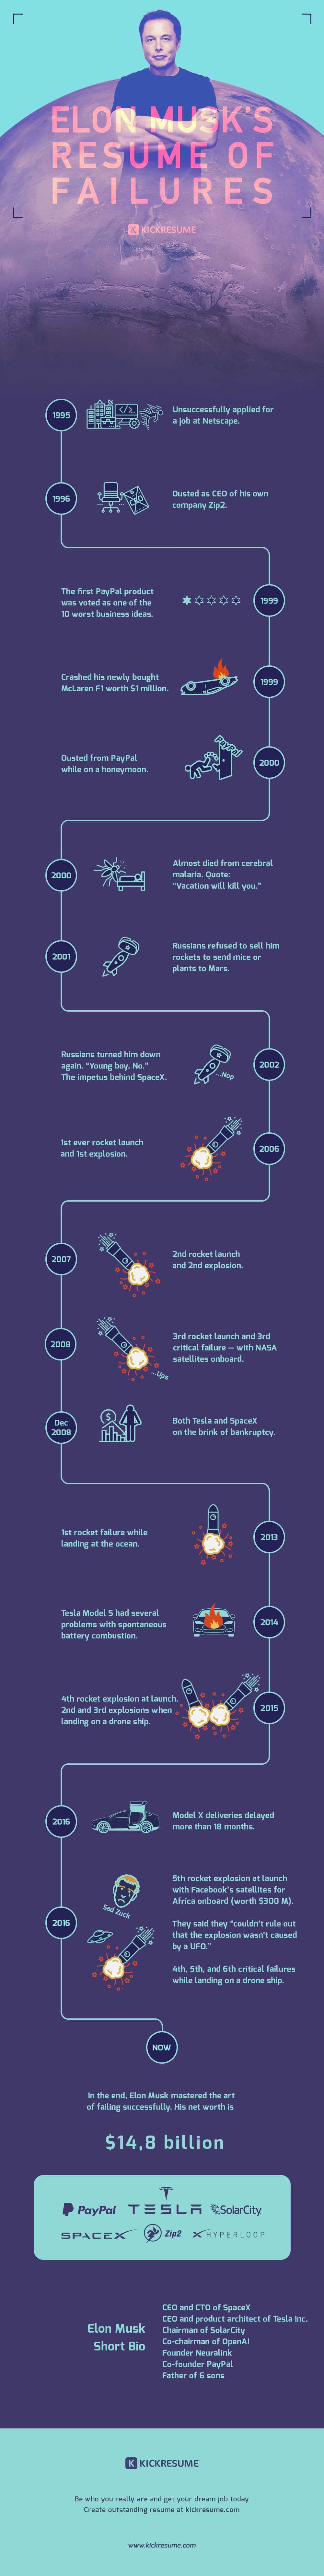 Elon Musk's Resume of Failures infographic